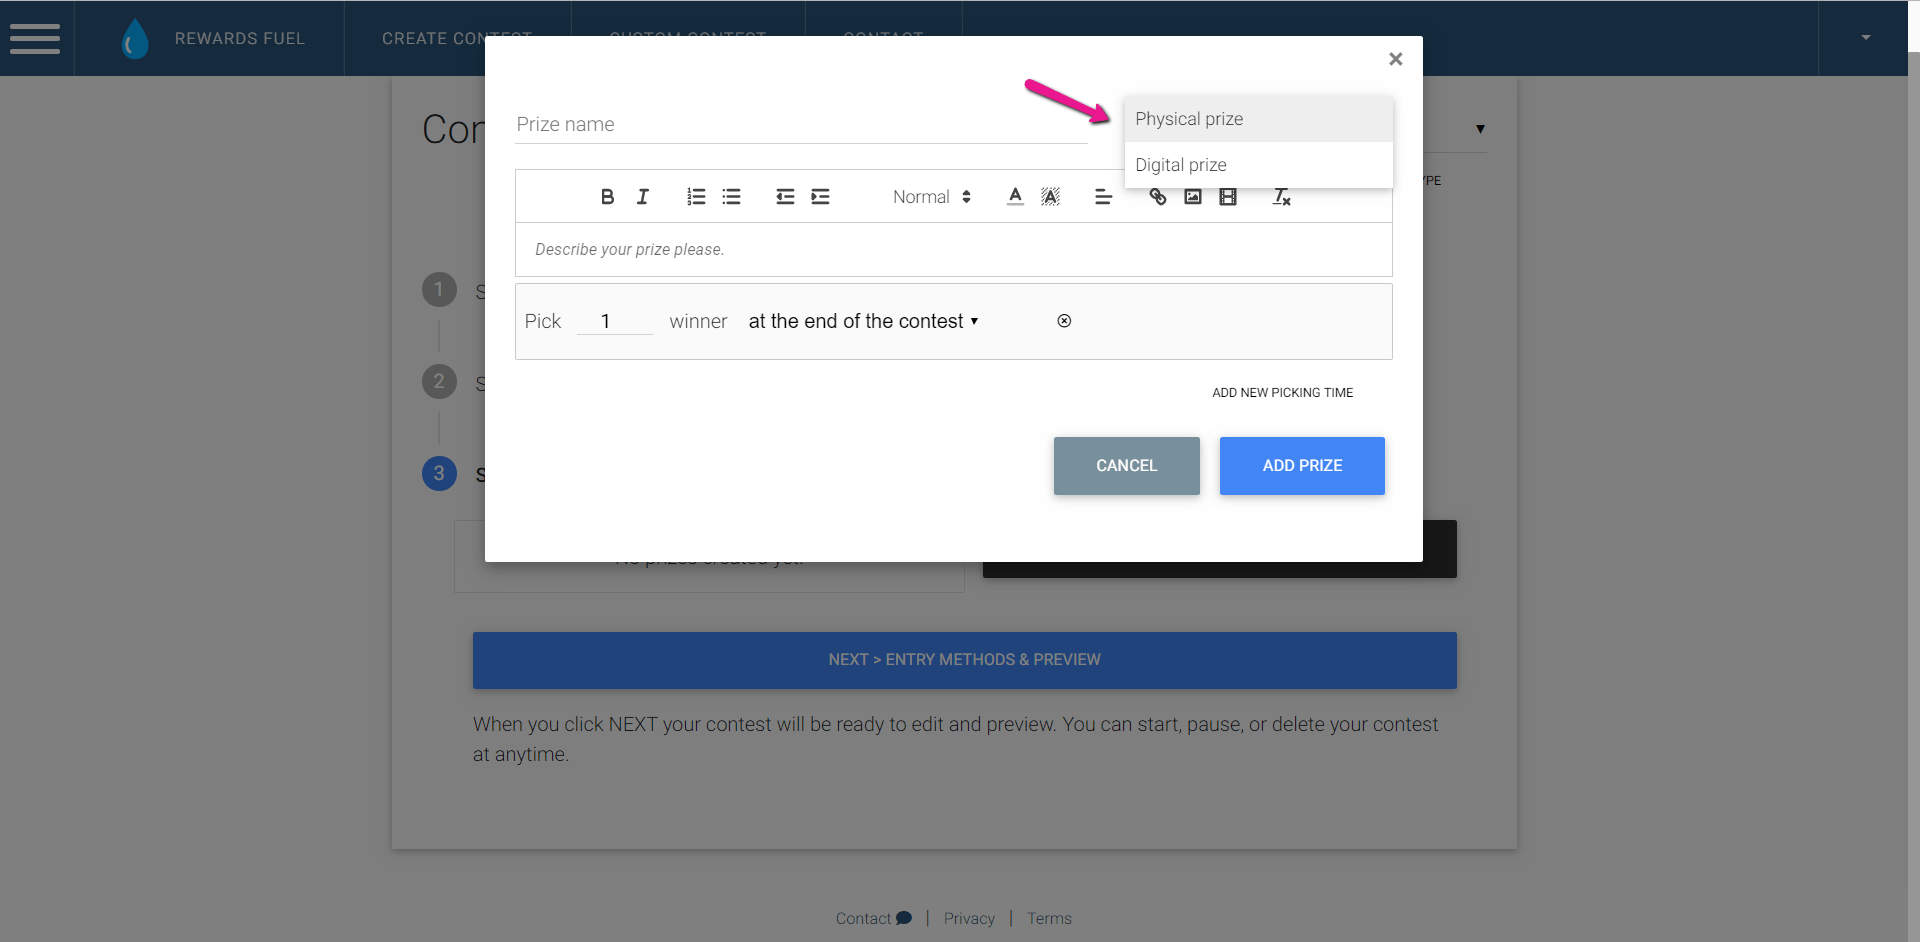 Create a prize and select the digital option